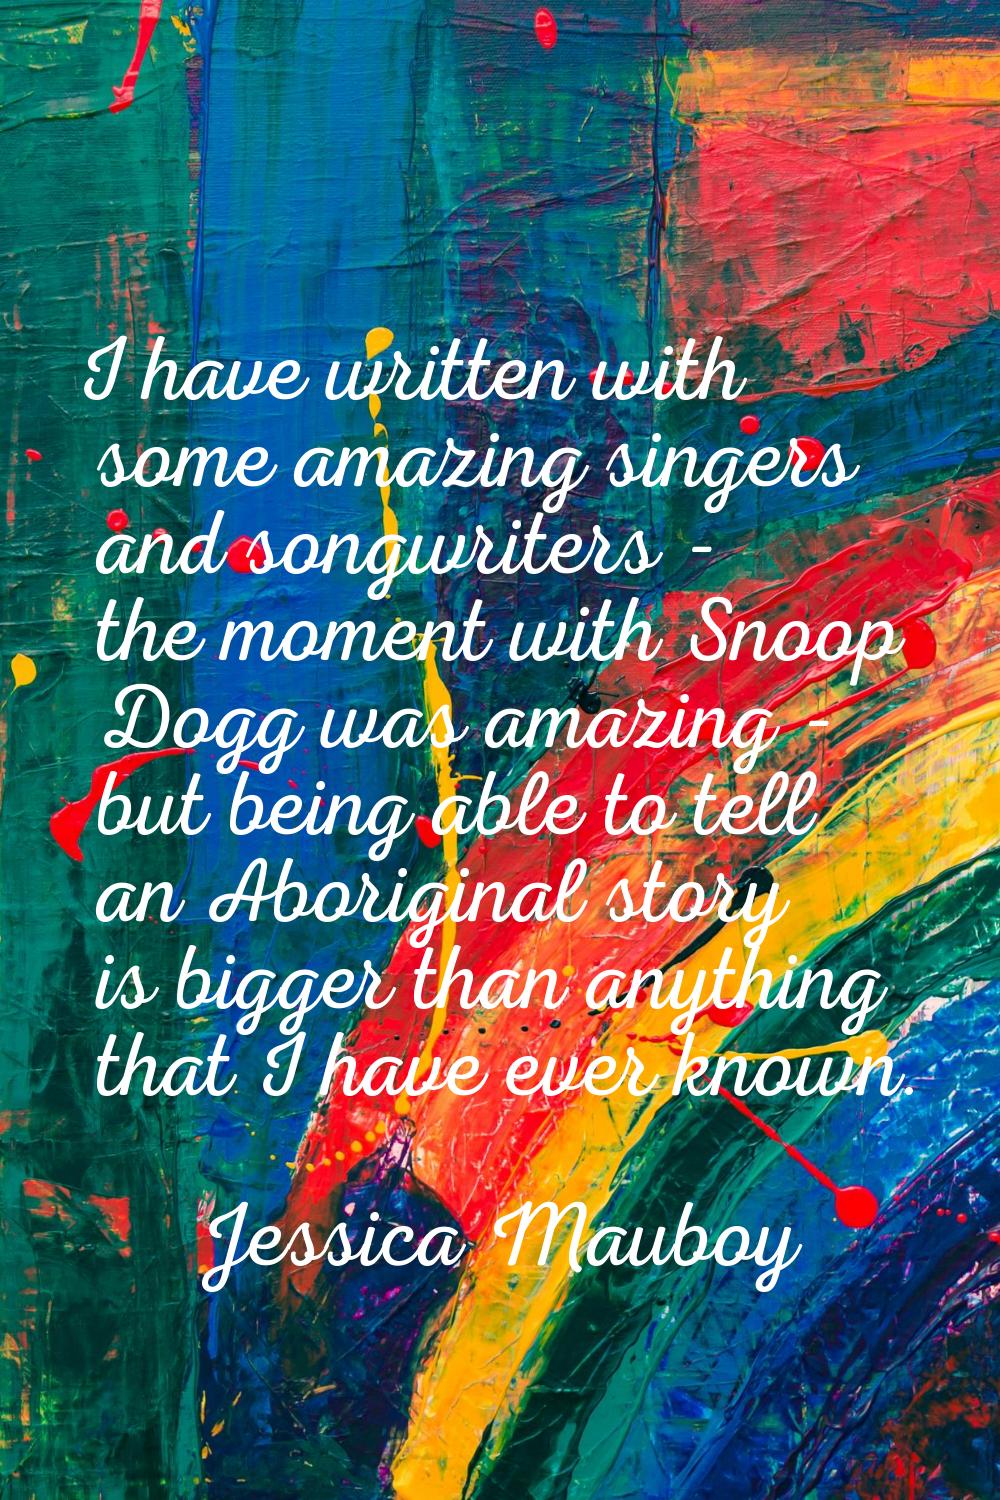 I have written with some amazing singers and songwriters - the moment with Snoop Dogg was amazing -